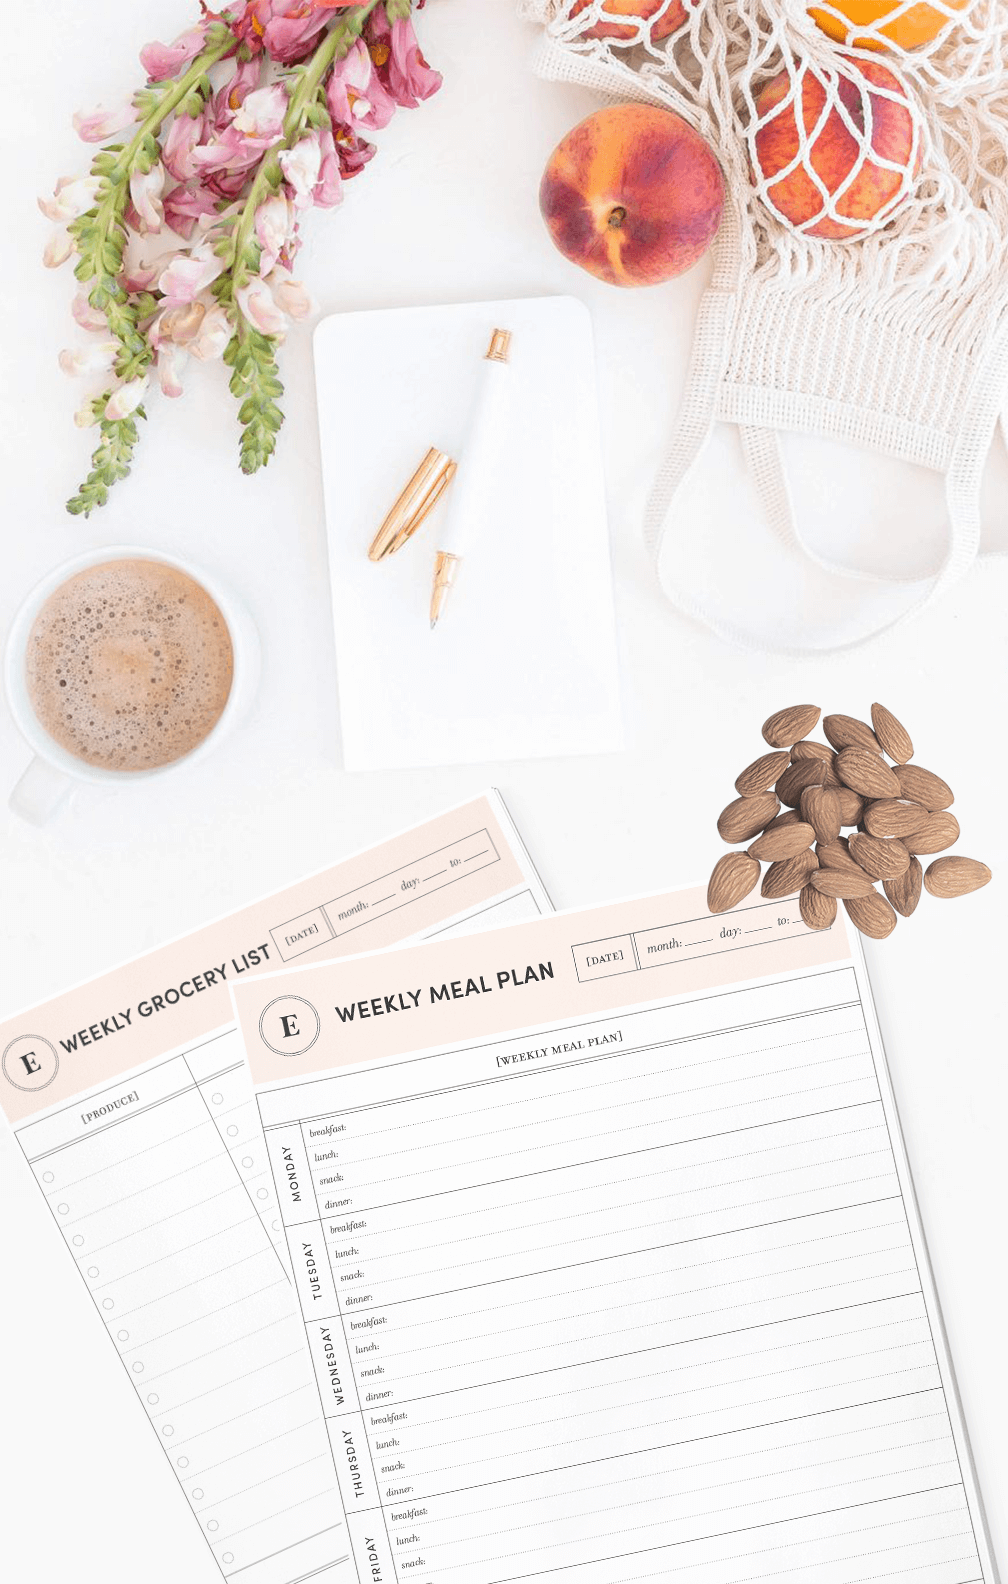 Take control of your wellness with this free meal planner printable! Learn healthy habits and start saving money grocery shopping and eating with intention.